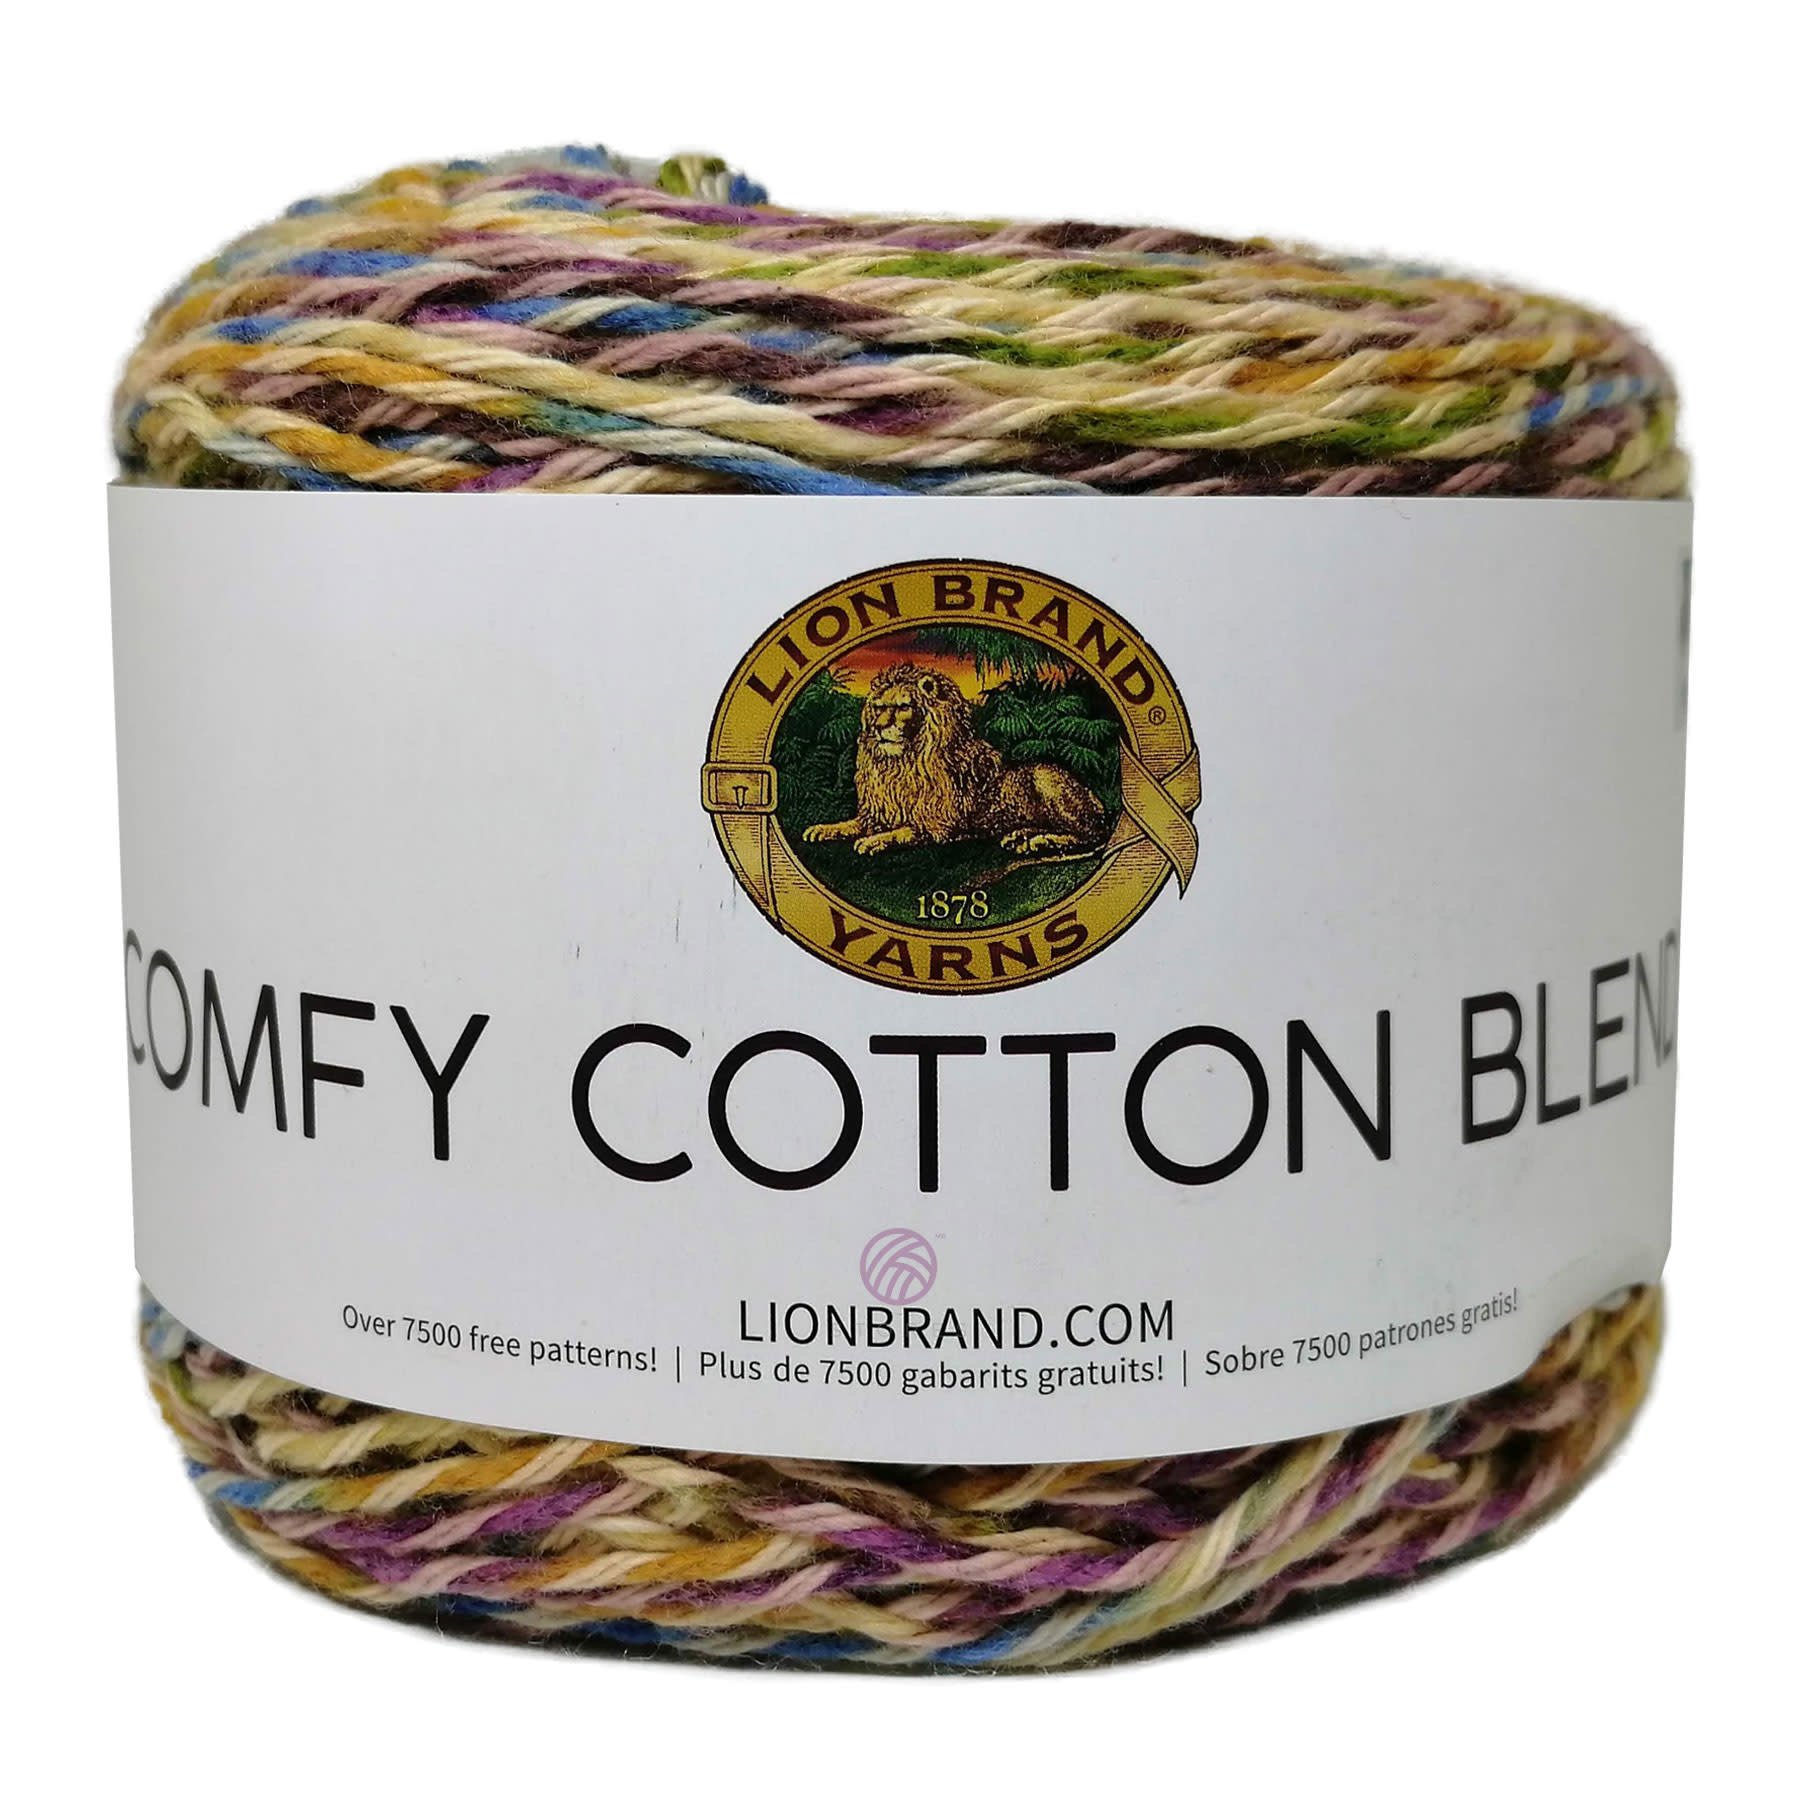 3 Pack) Lion Brand Yarn comfy cotton Blend Yarn, Whipped cream 